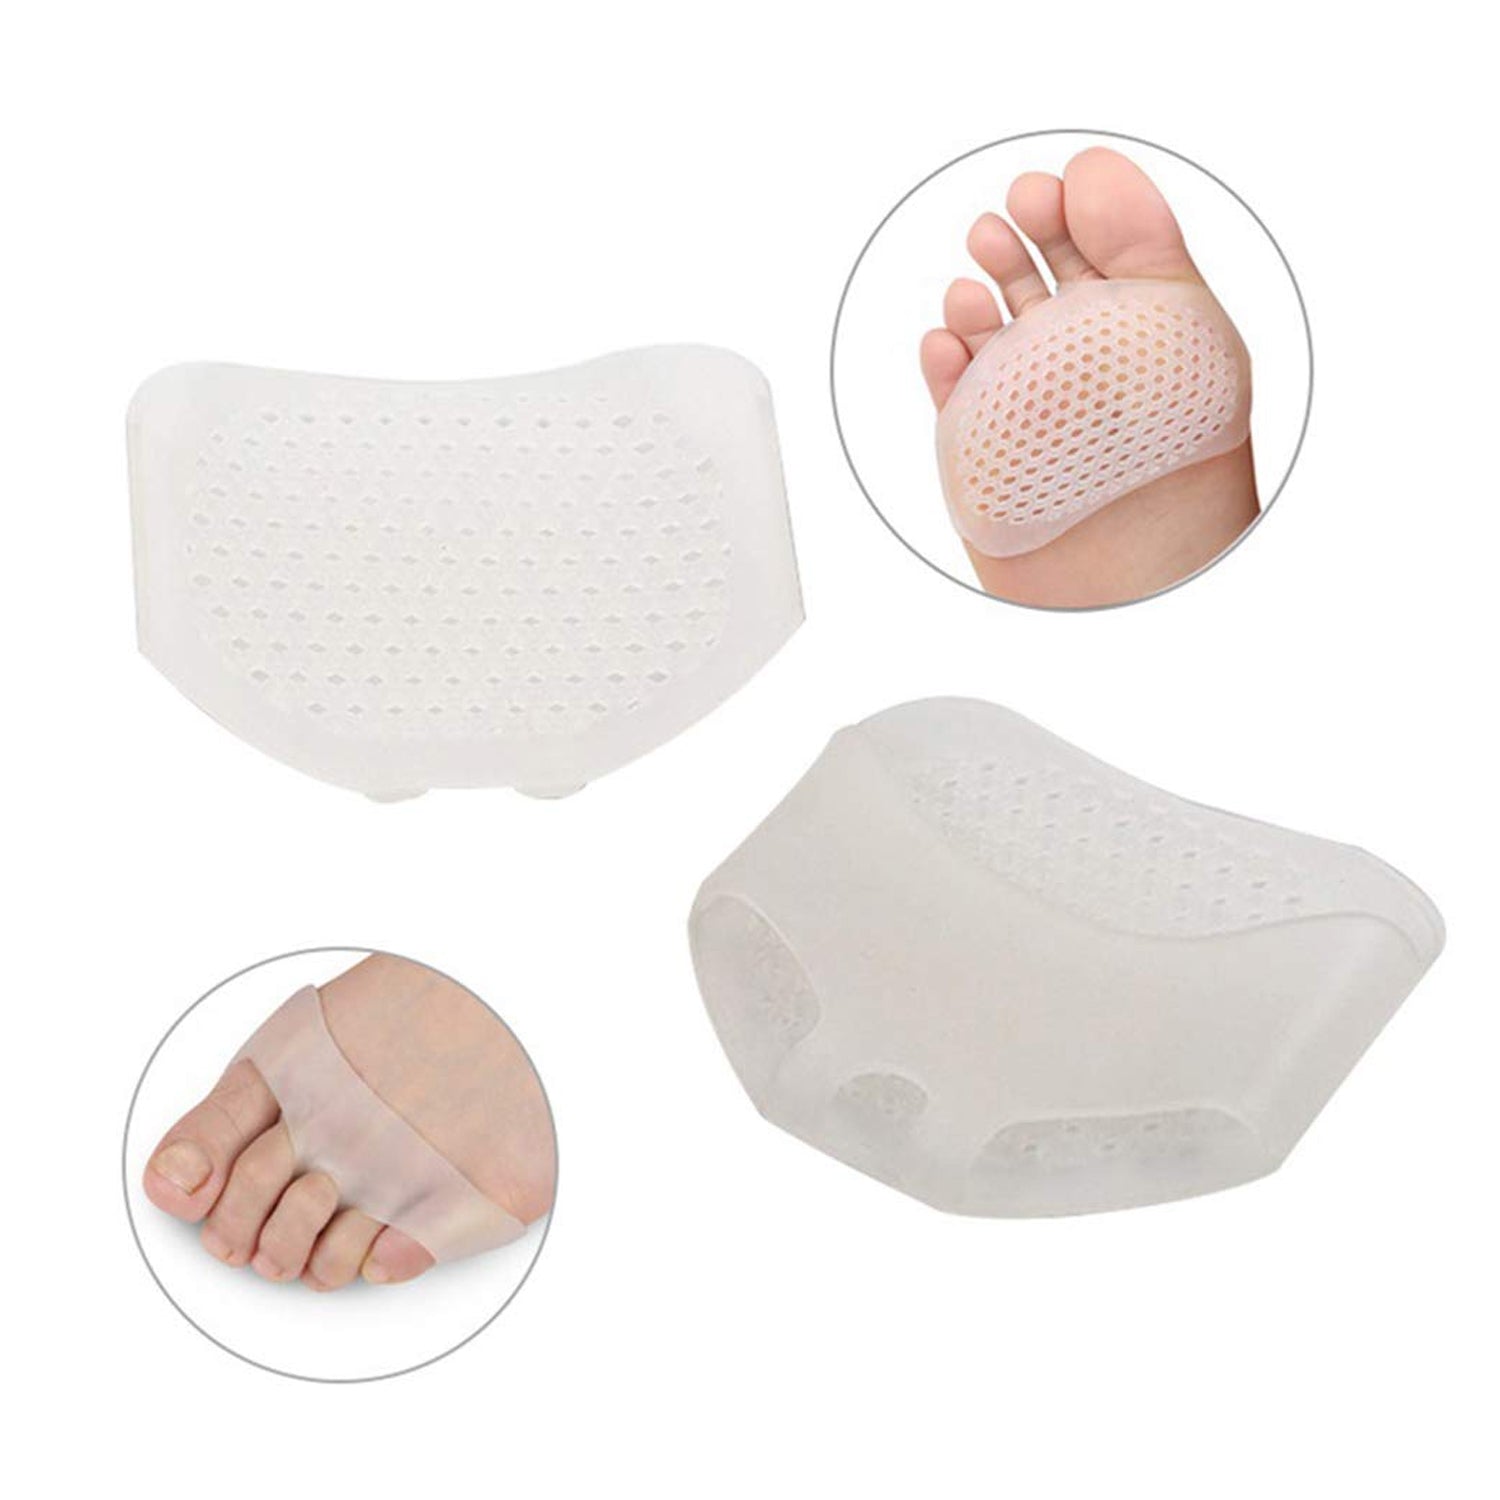 6862 Silicone Front Foot Pad Anti-Slip Insole for Pain Relief, for Forefoot Pain, Calluses, Blisters, Forefoot Cushioning Relief- Men Women (1 Pair)